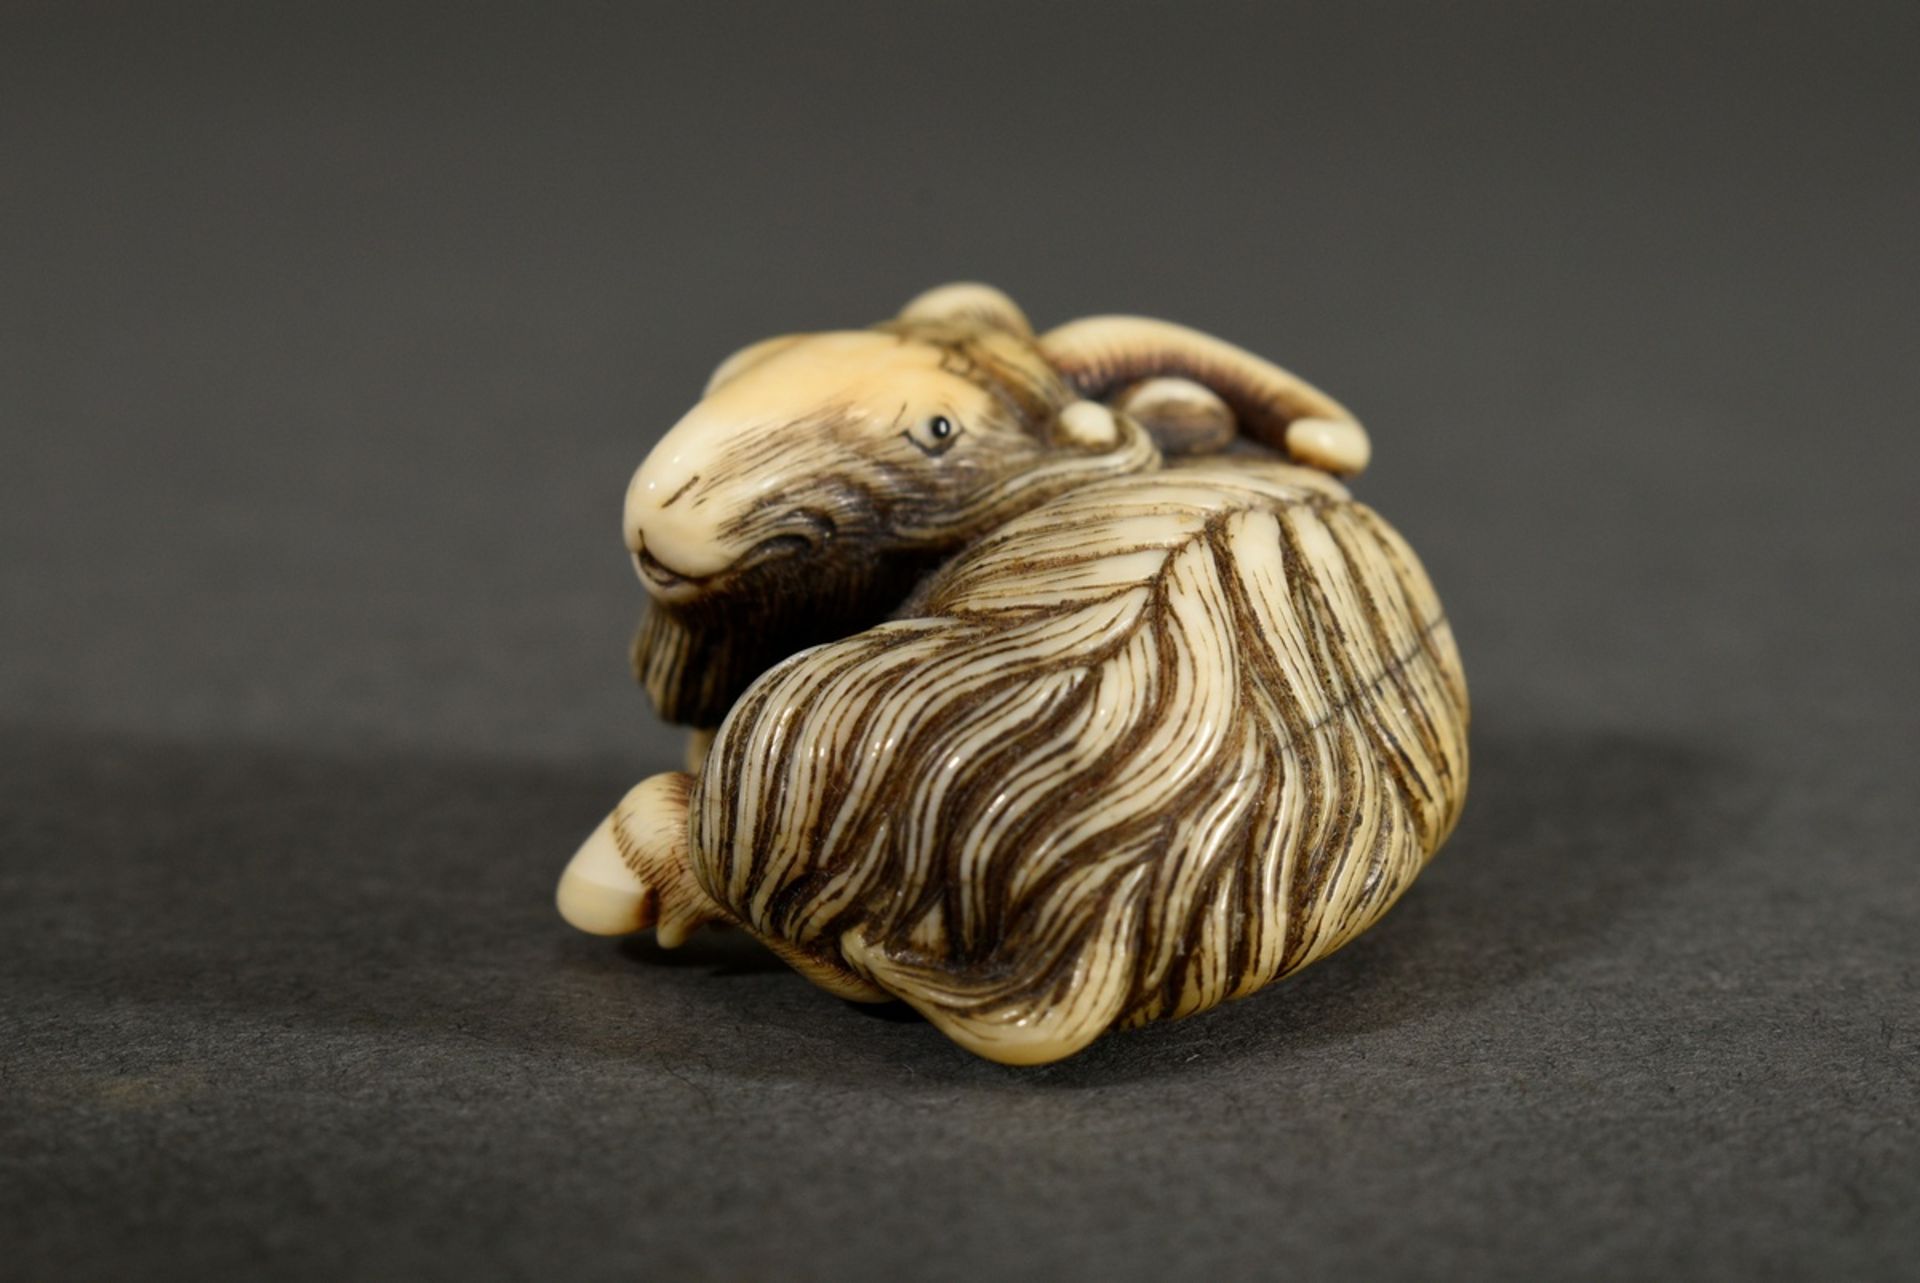 Ivory netsuke "Rolled-in mountain goat" with inlaid eyes of black horn and engraved fur, golden pat - Image 4 of 6